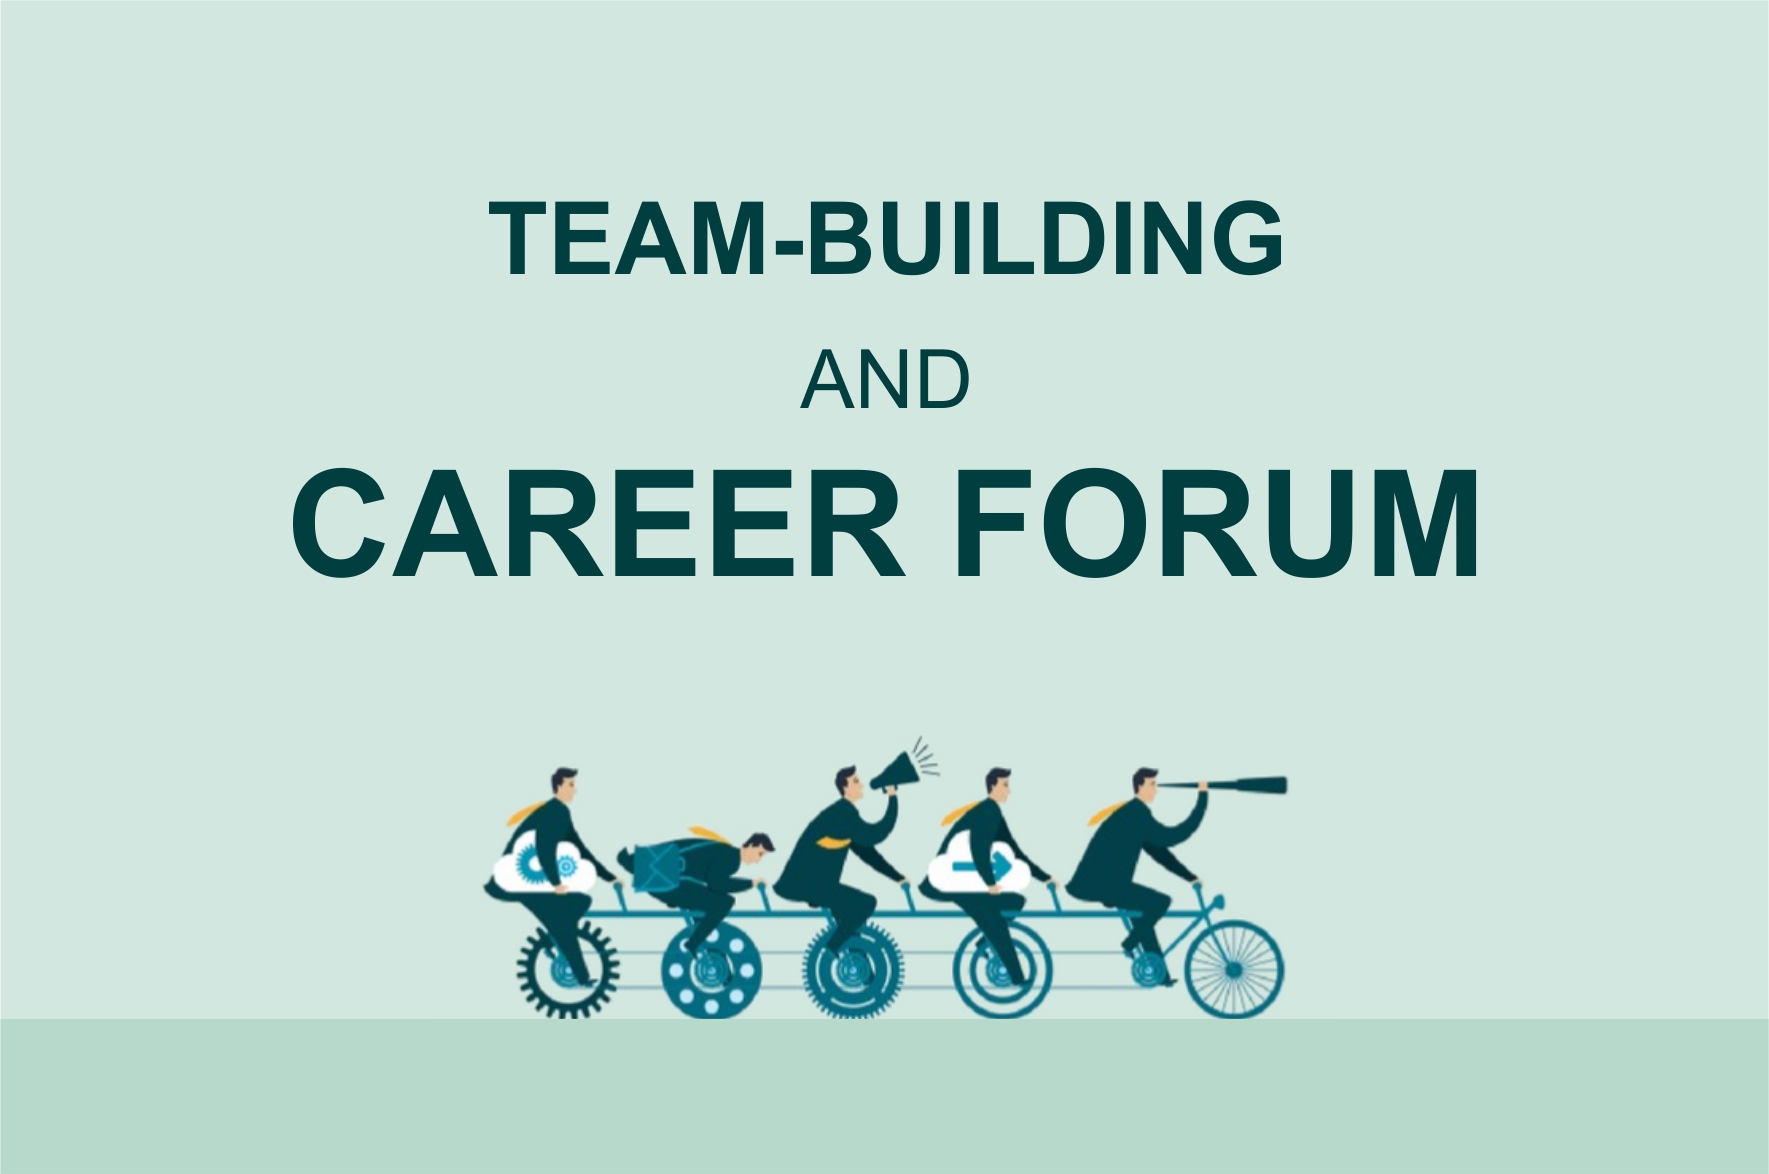 Team-building and Career Forum by InternetDevels & PM Business Solutions